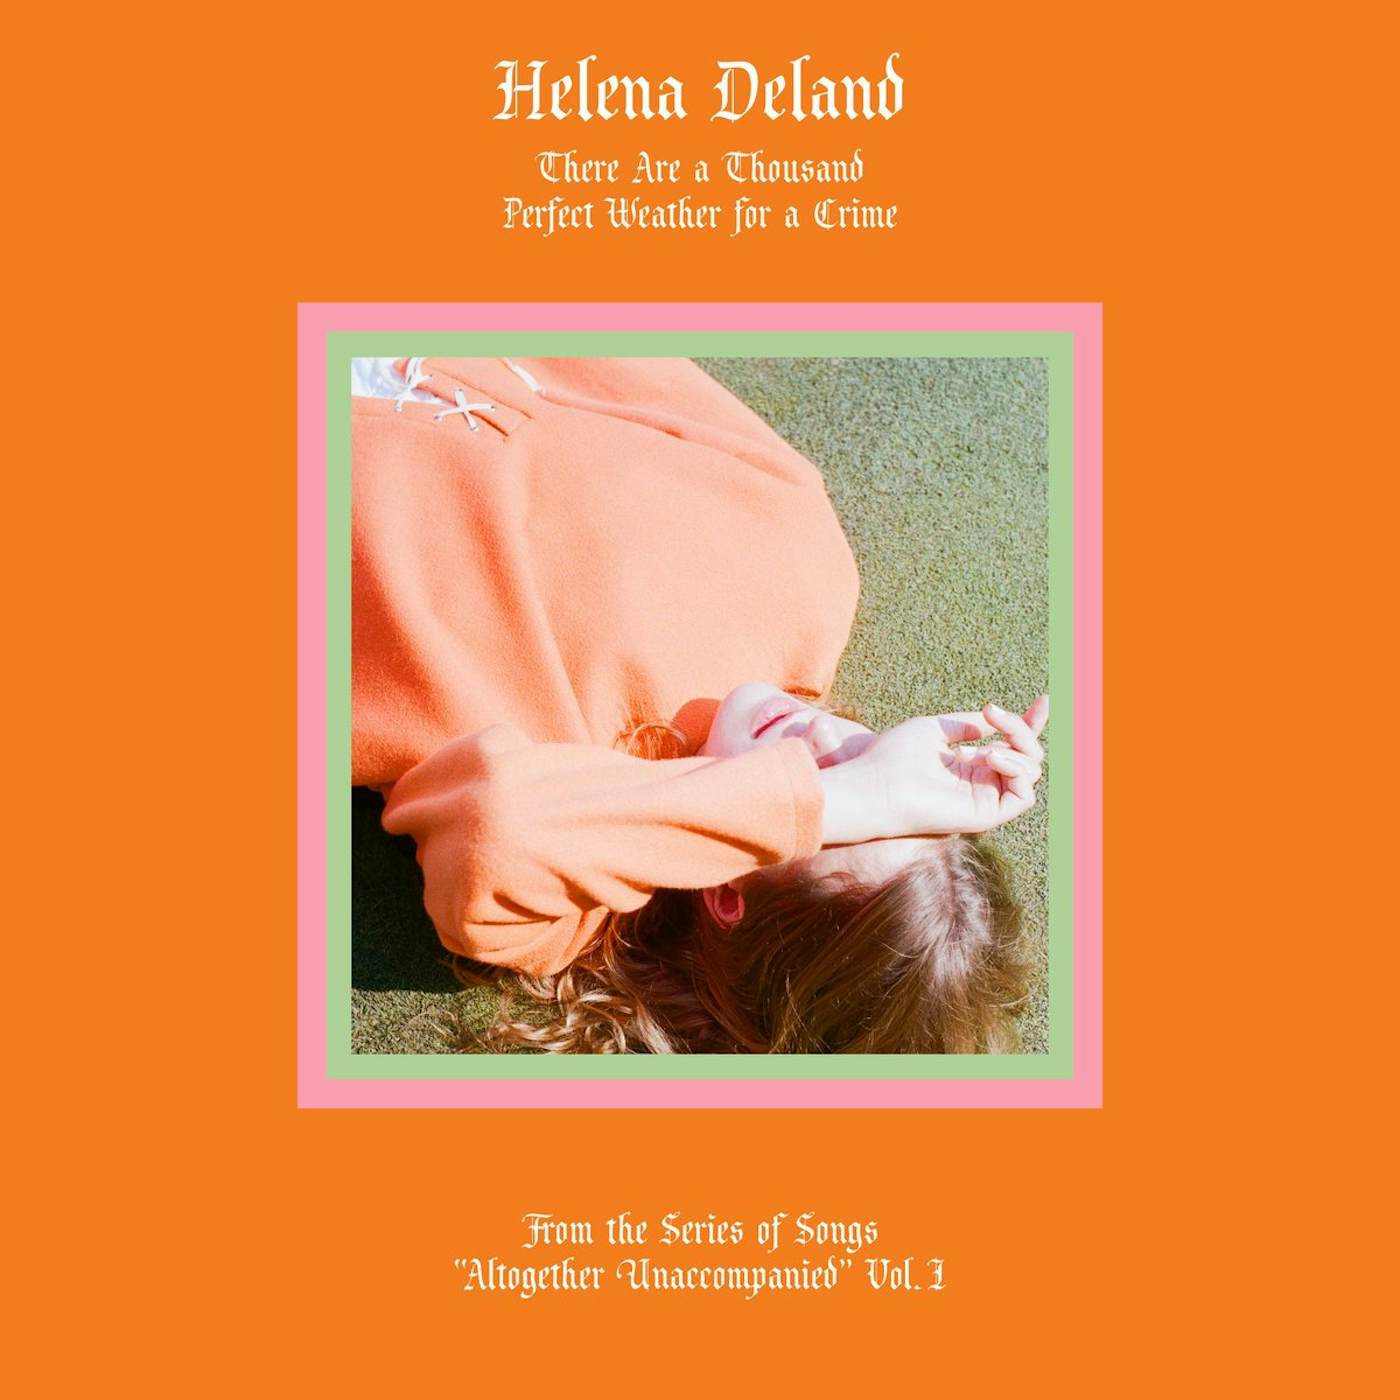 Helena Deland / From The Series Of Songs "Altogether Unaccompanied" Vol. I & II - LP (Vinyl)